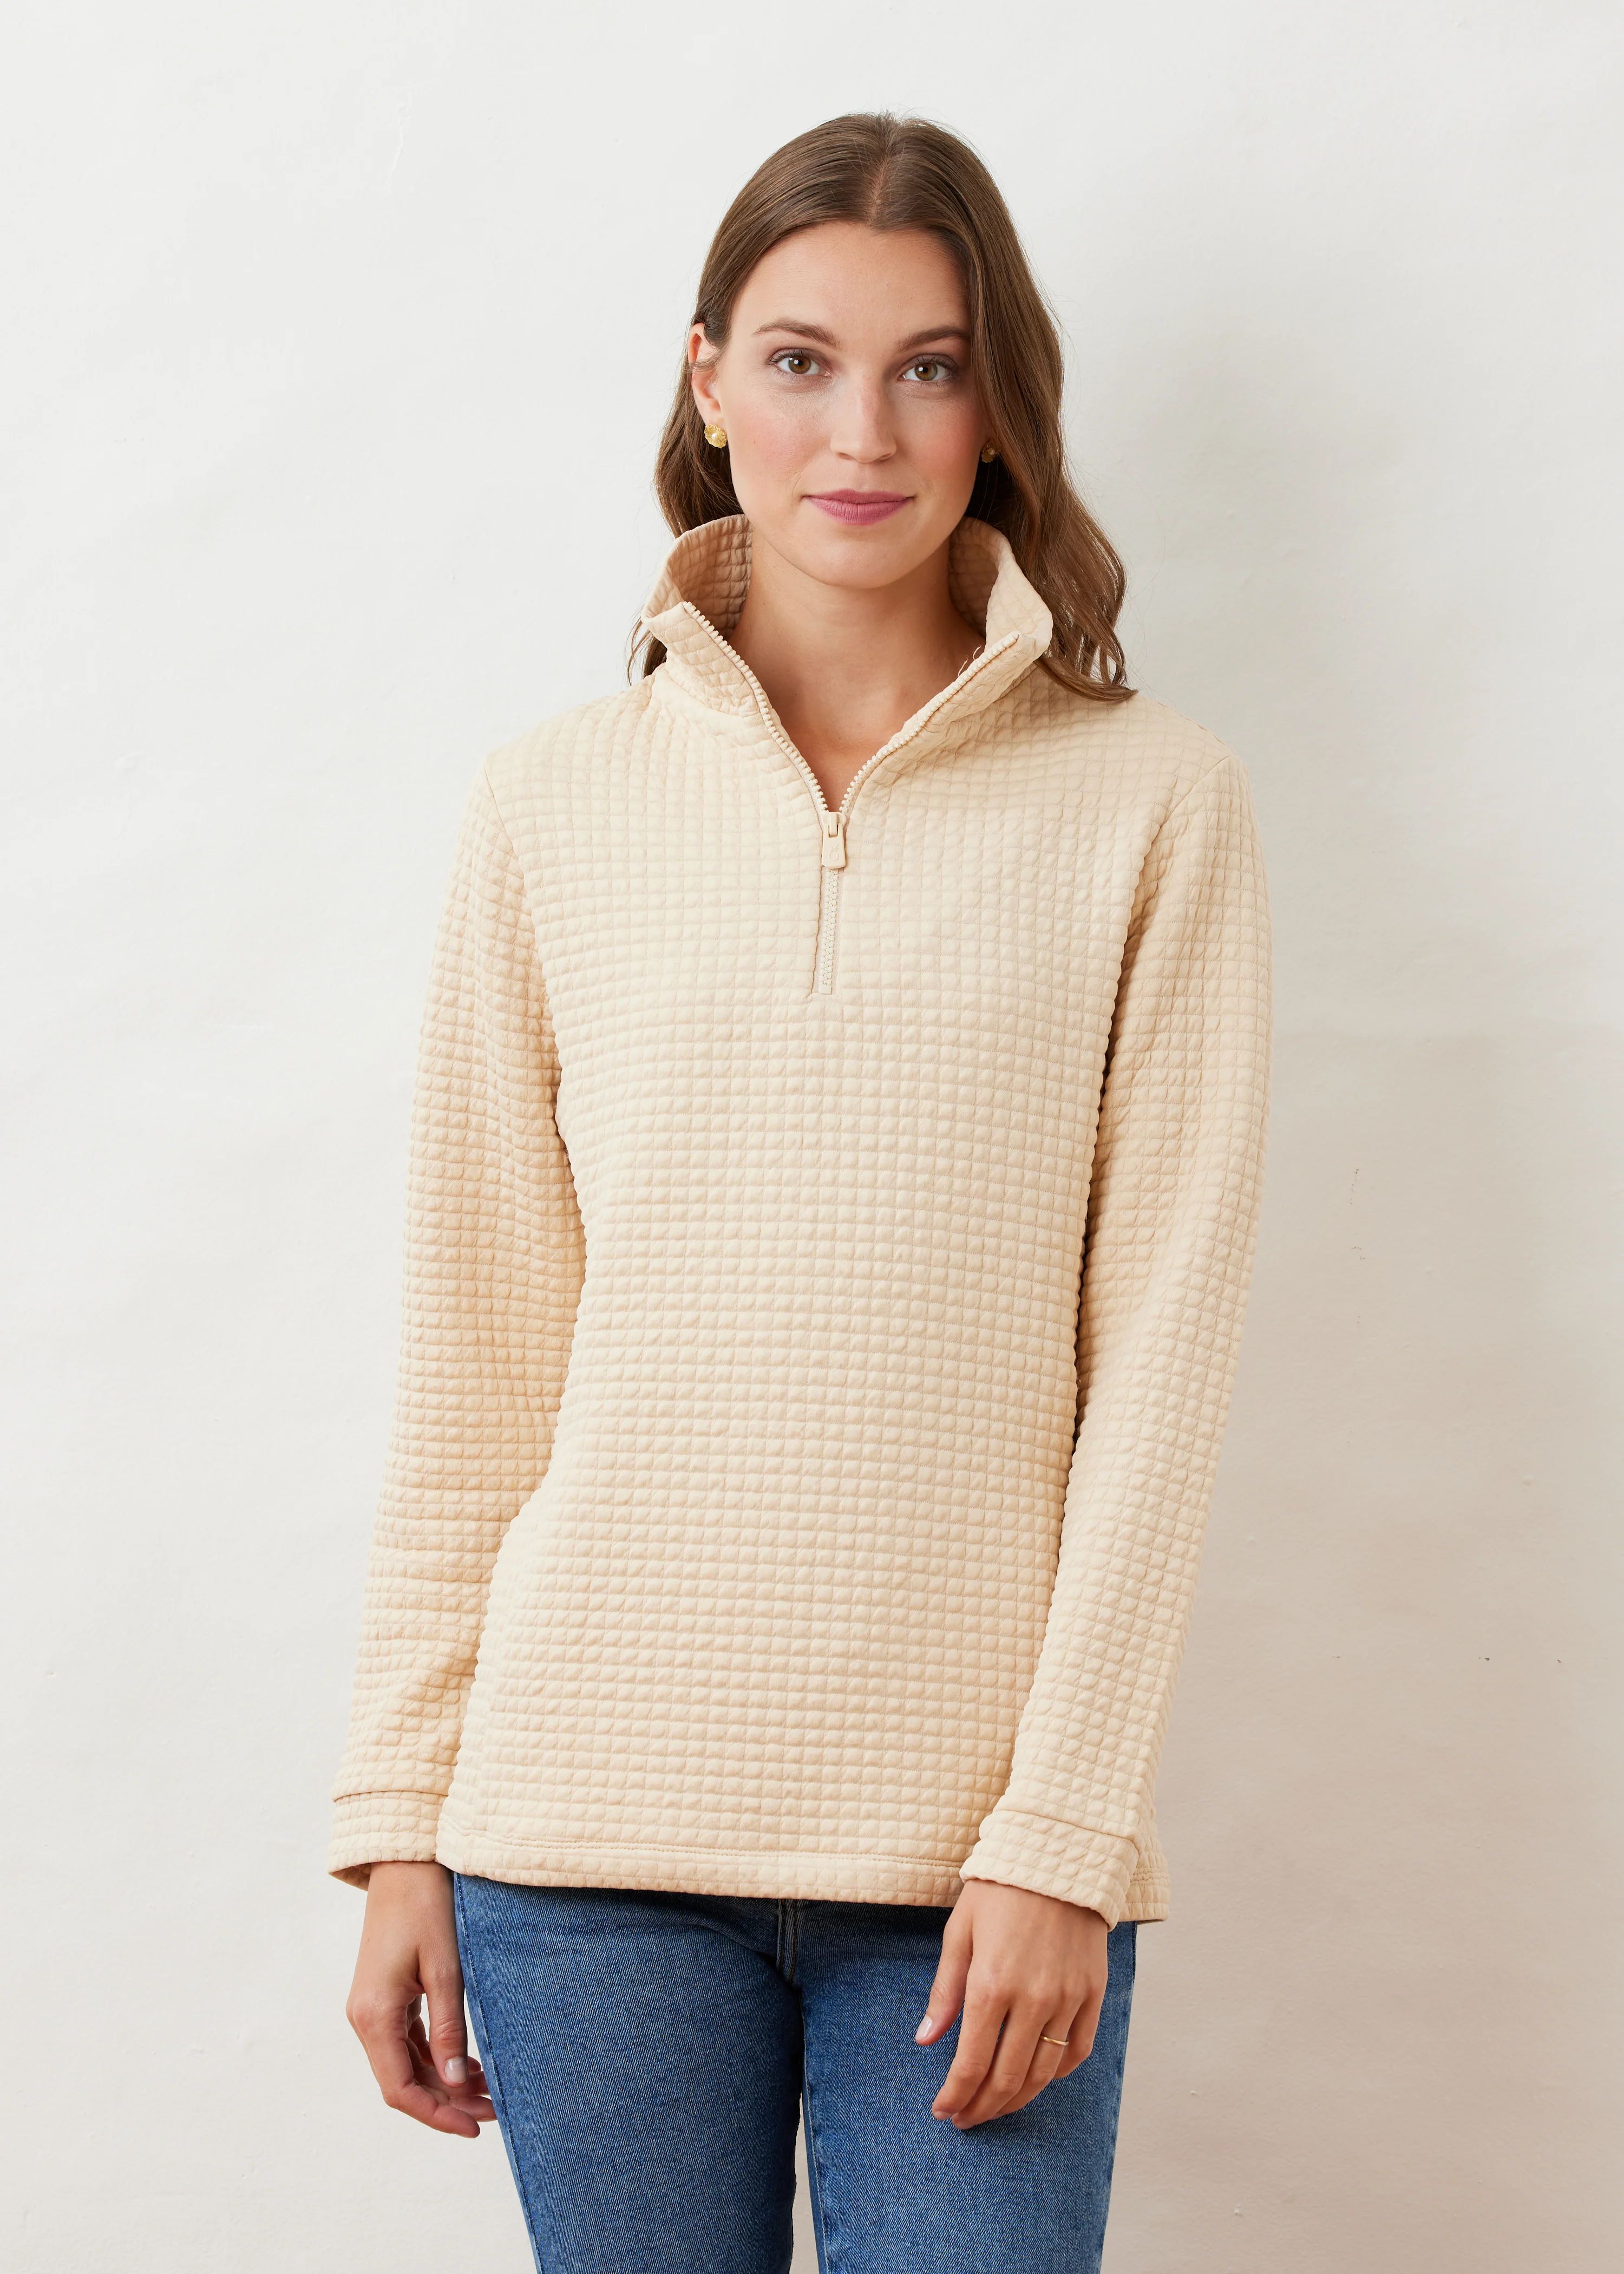 Pocomo Pullover in Waffle (Natural Blush) | Dudley Stephens